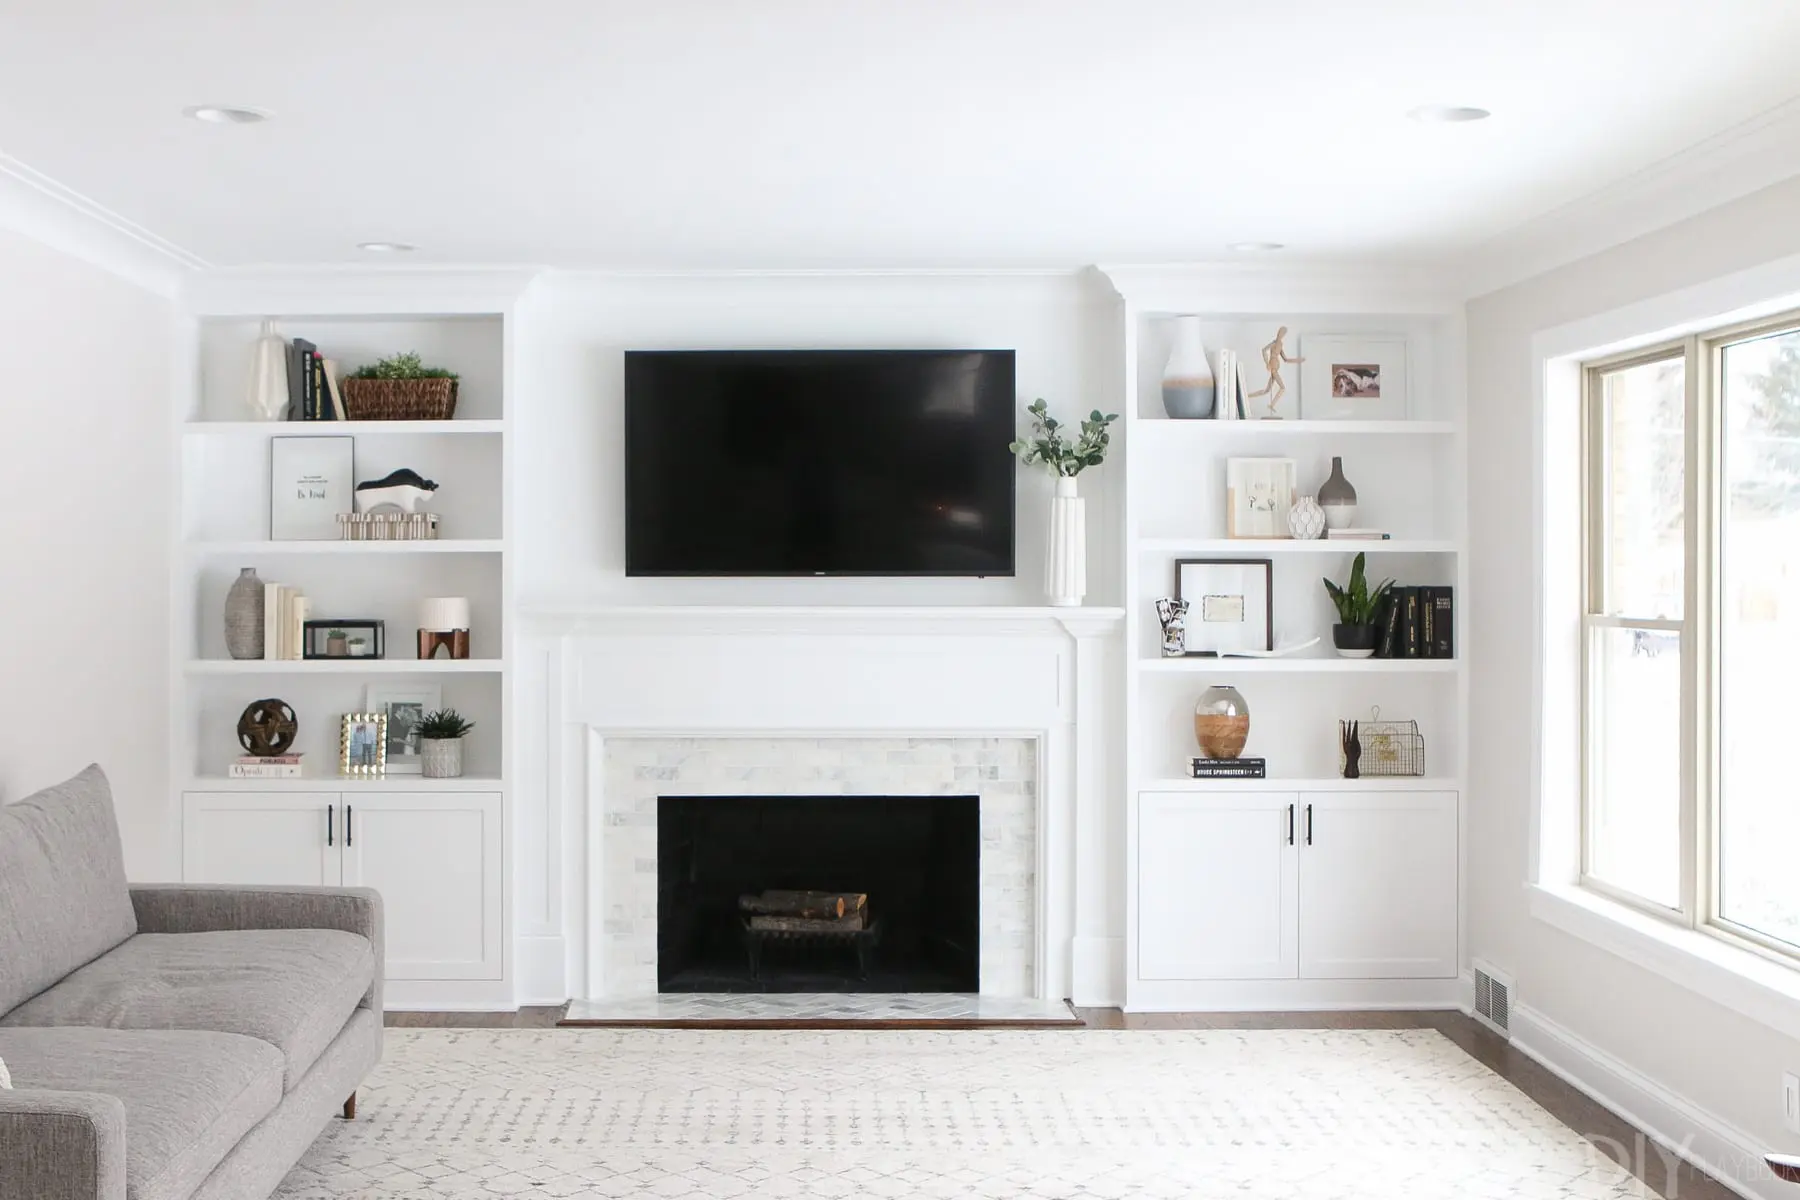 Decorating Built In Shelves, Shelves Around Fireplace Ideas